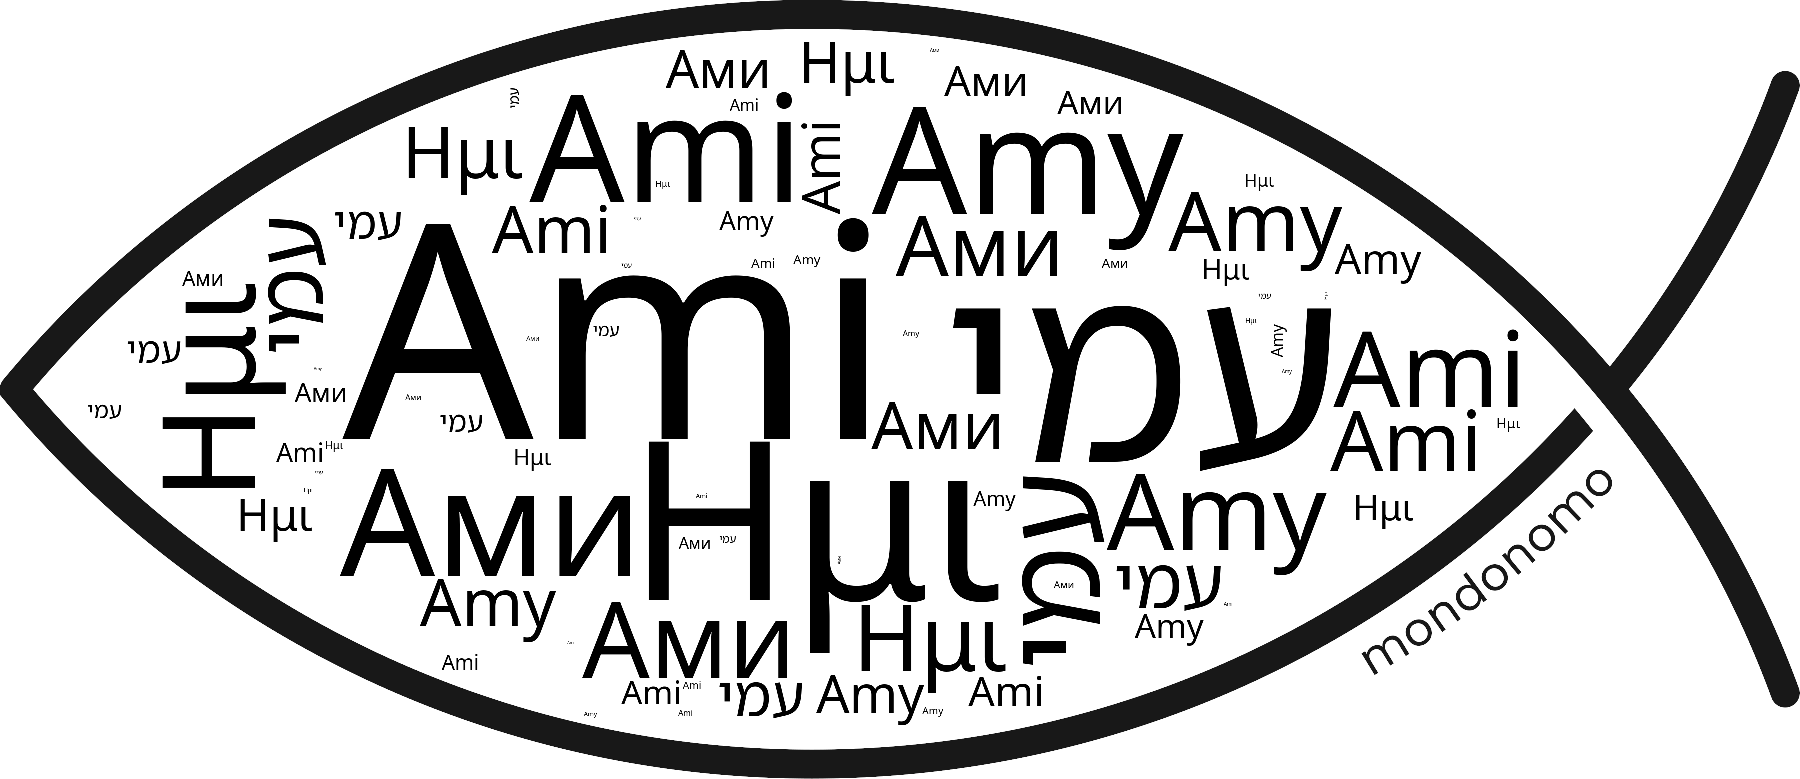 Name Ami in the world's Bibles